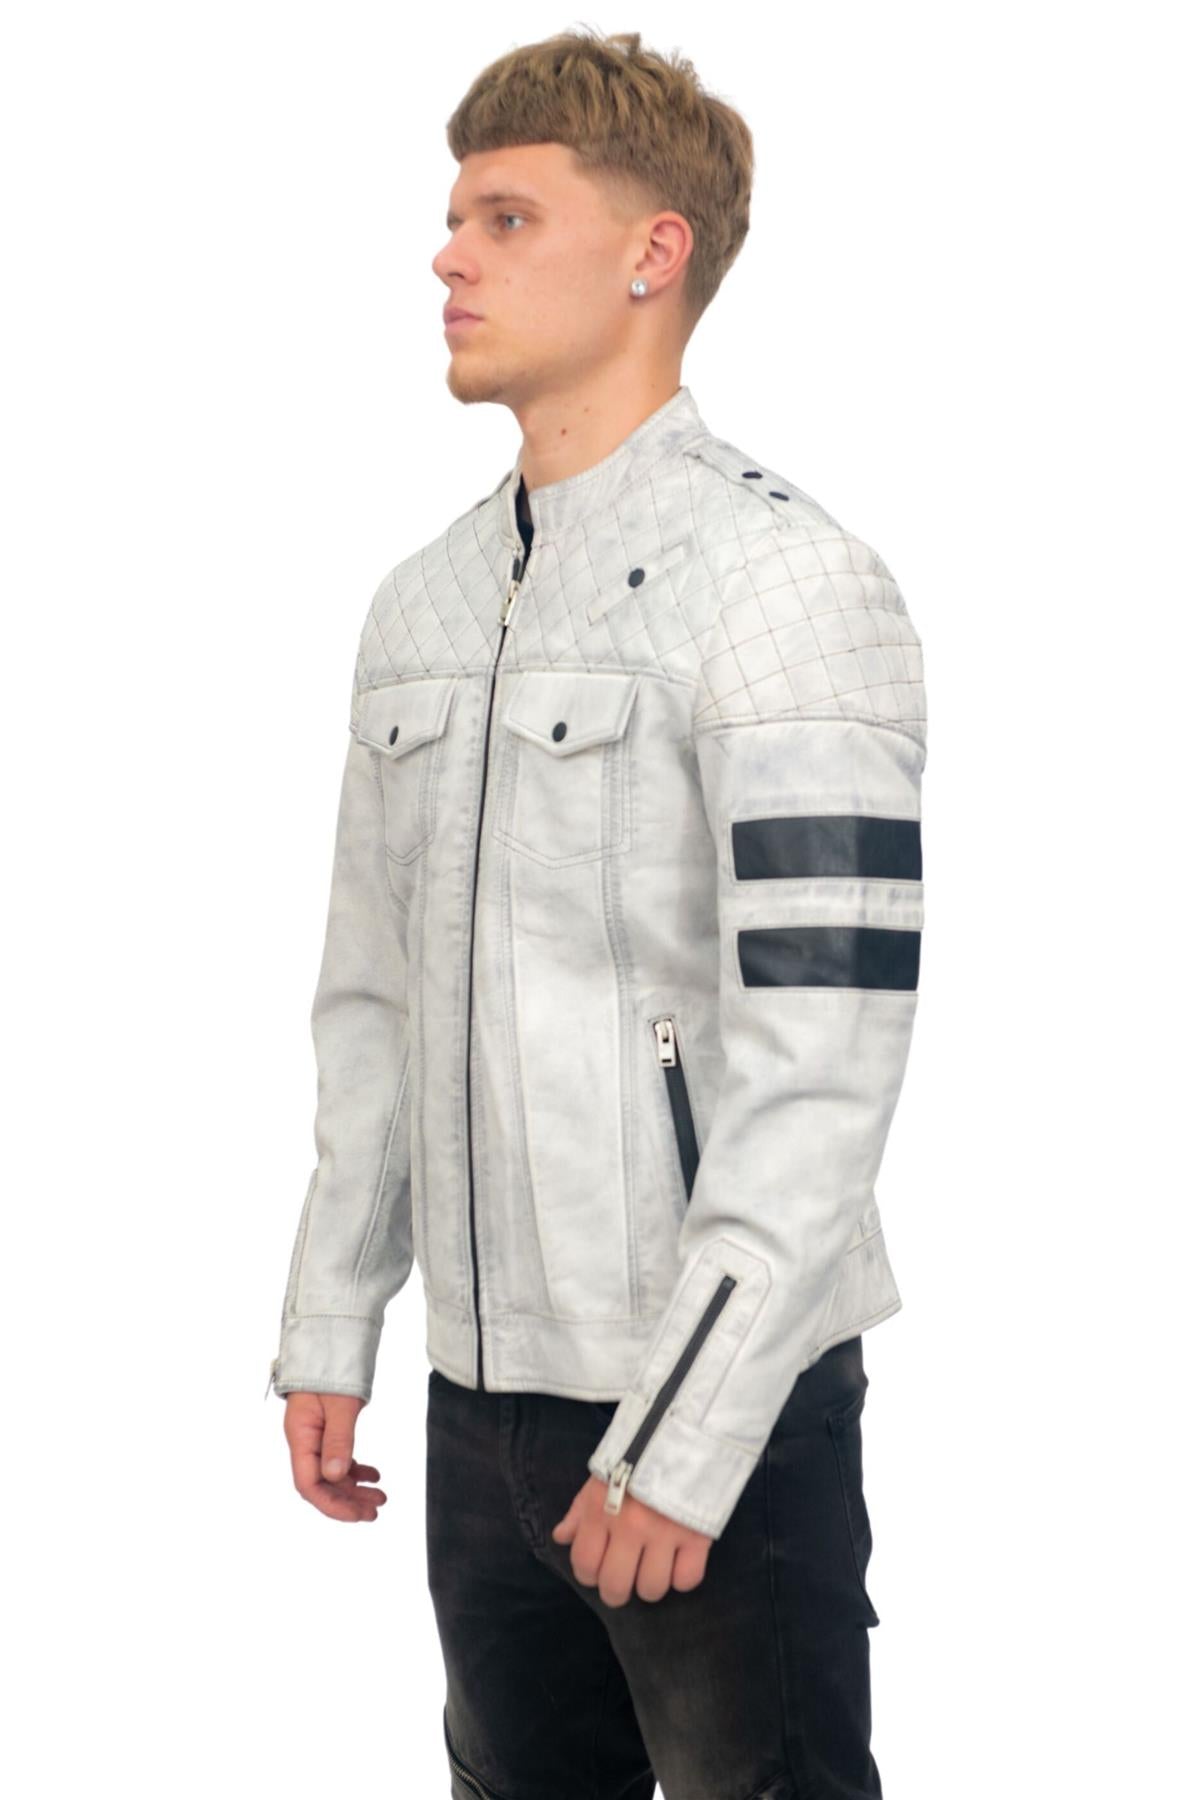 Mens Vintage Quilted Leather Racing Jacket-Cardiff